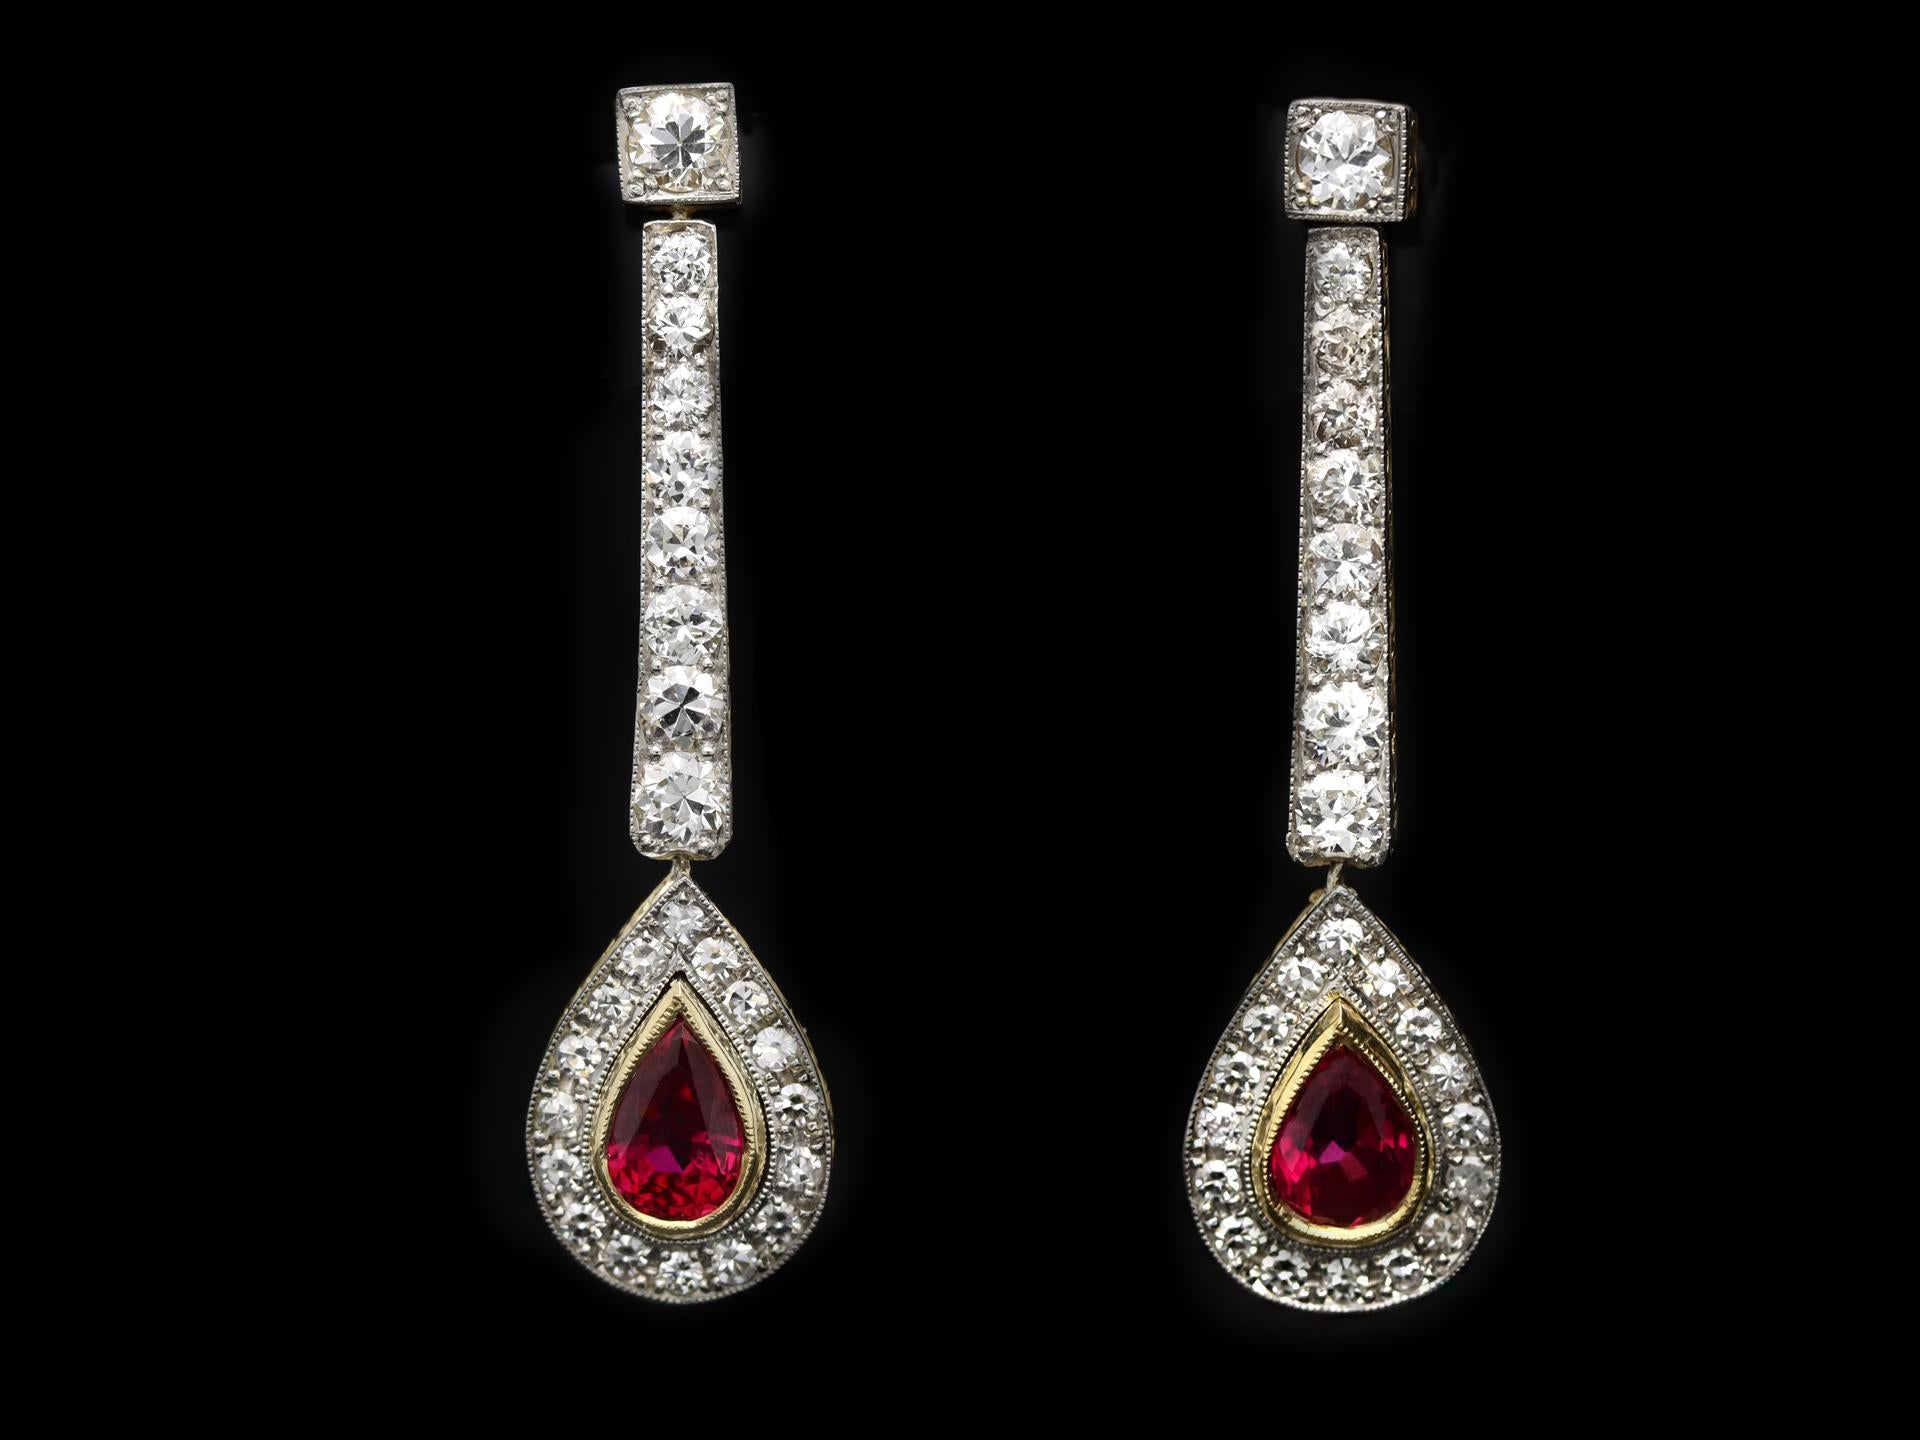 Edwardian Burmese ruby and diamond drop earrings. A matching pair each set with one drop shape old cut natural unenhanced Burmese ruby in an open back rubover setting, two in total with an approximate combined weight of 2.00 carats, surrounded by